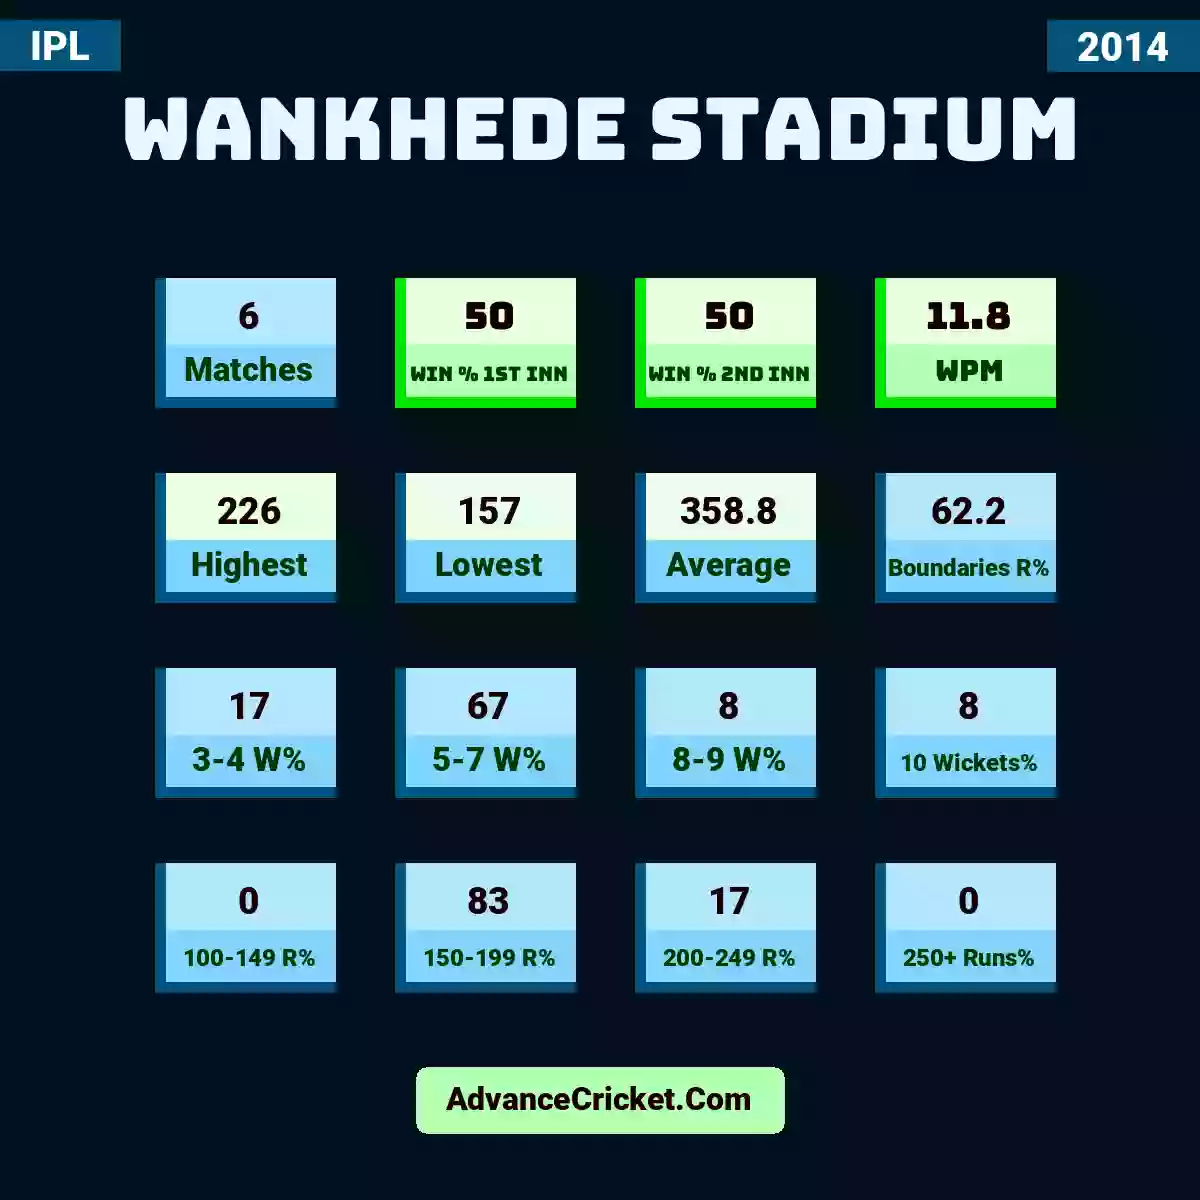 Image showing Wankhede Stadium with Matches: 6, Win % 1st Inn: 50, Win % 2nd Inn: 50, WPM: 11.8, Highest: 226, Lowest: 157, Average: 358.8, Boundaries R%: 62.2, 3-4 W%: 17, 5-7 W%: 67, 8-9 W%: 8, 10 Wickets%: 8, 100-149 R%: 0, 150-199 R%: 83, 200-249 R%: 17, 250+ Runs%: 0.